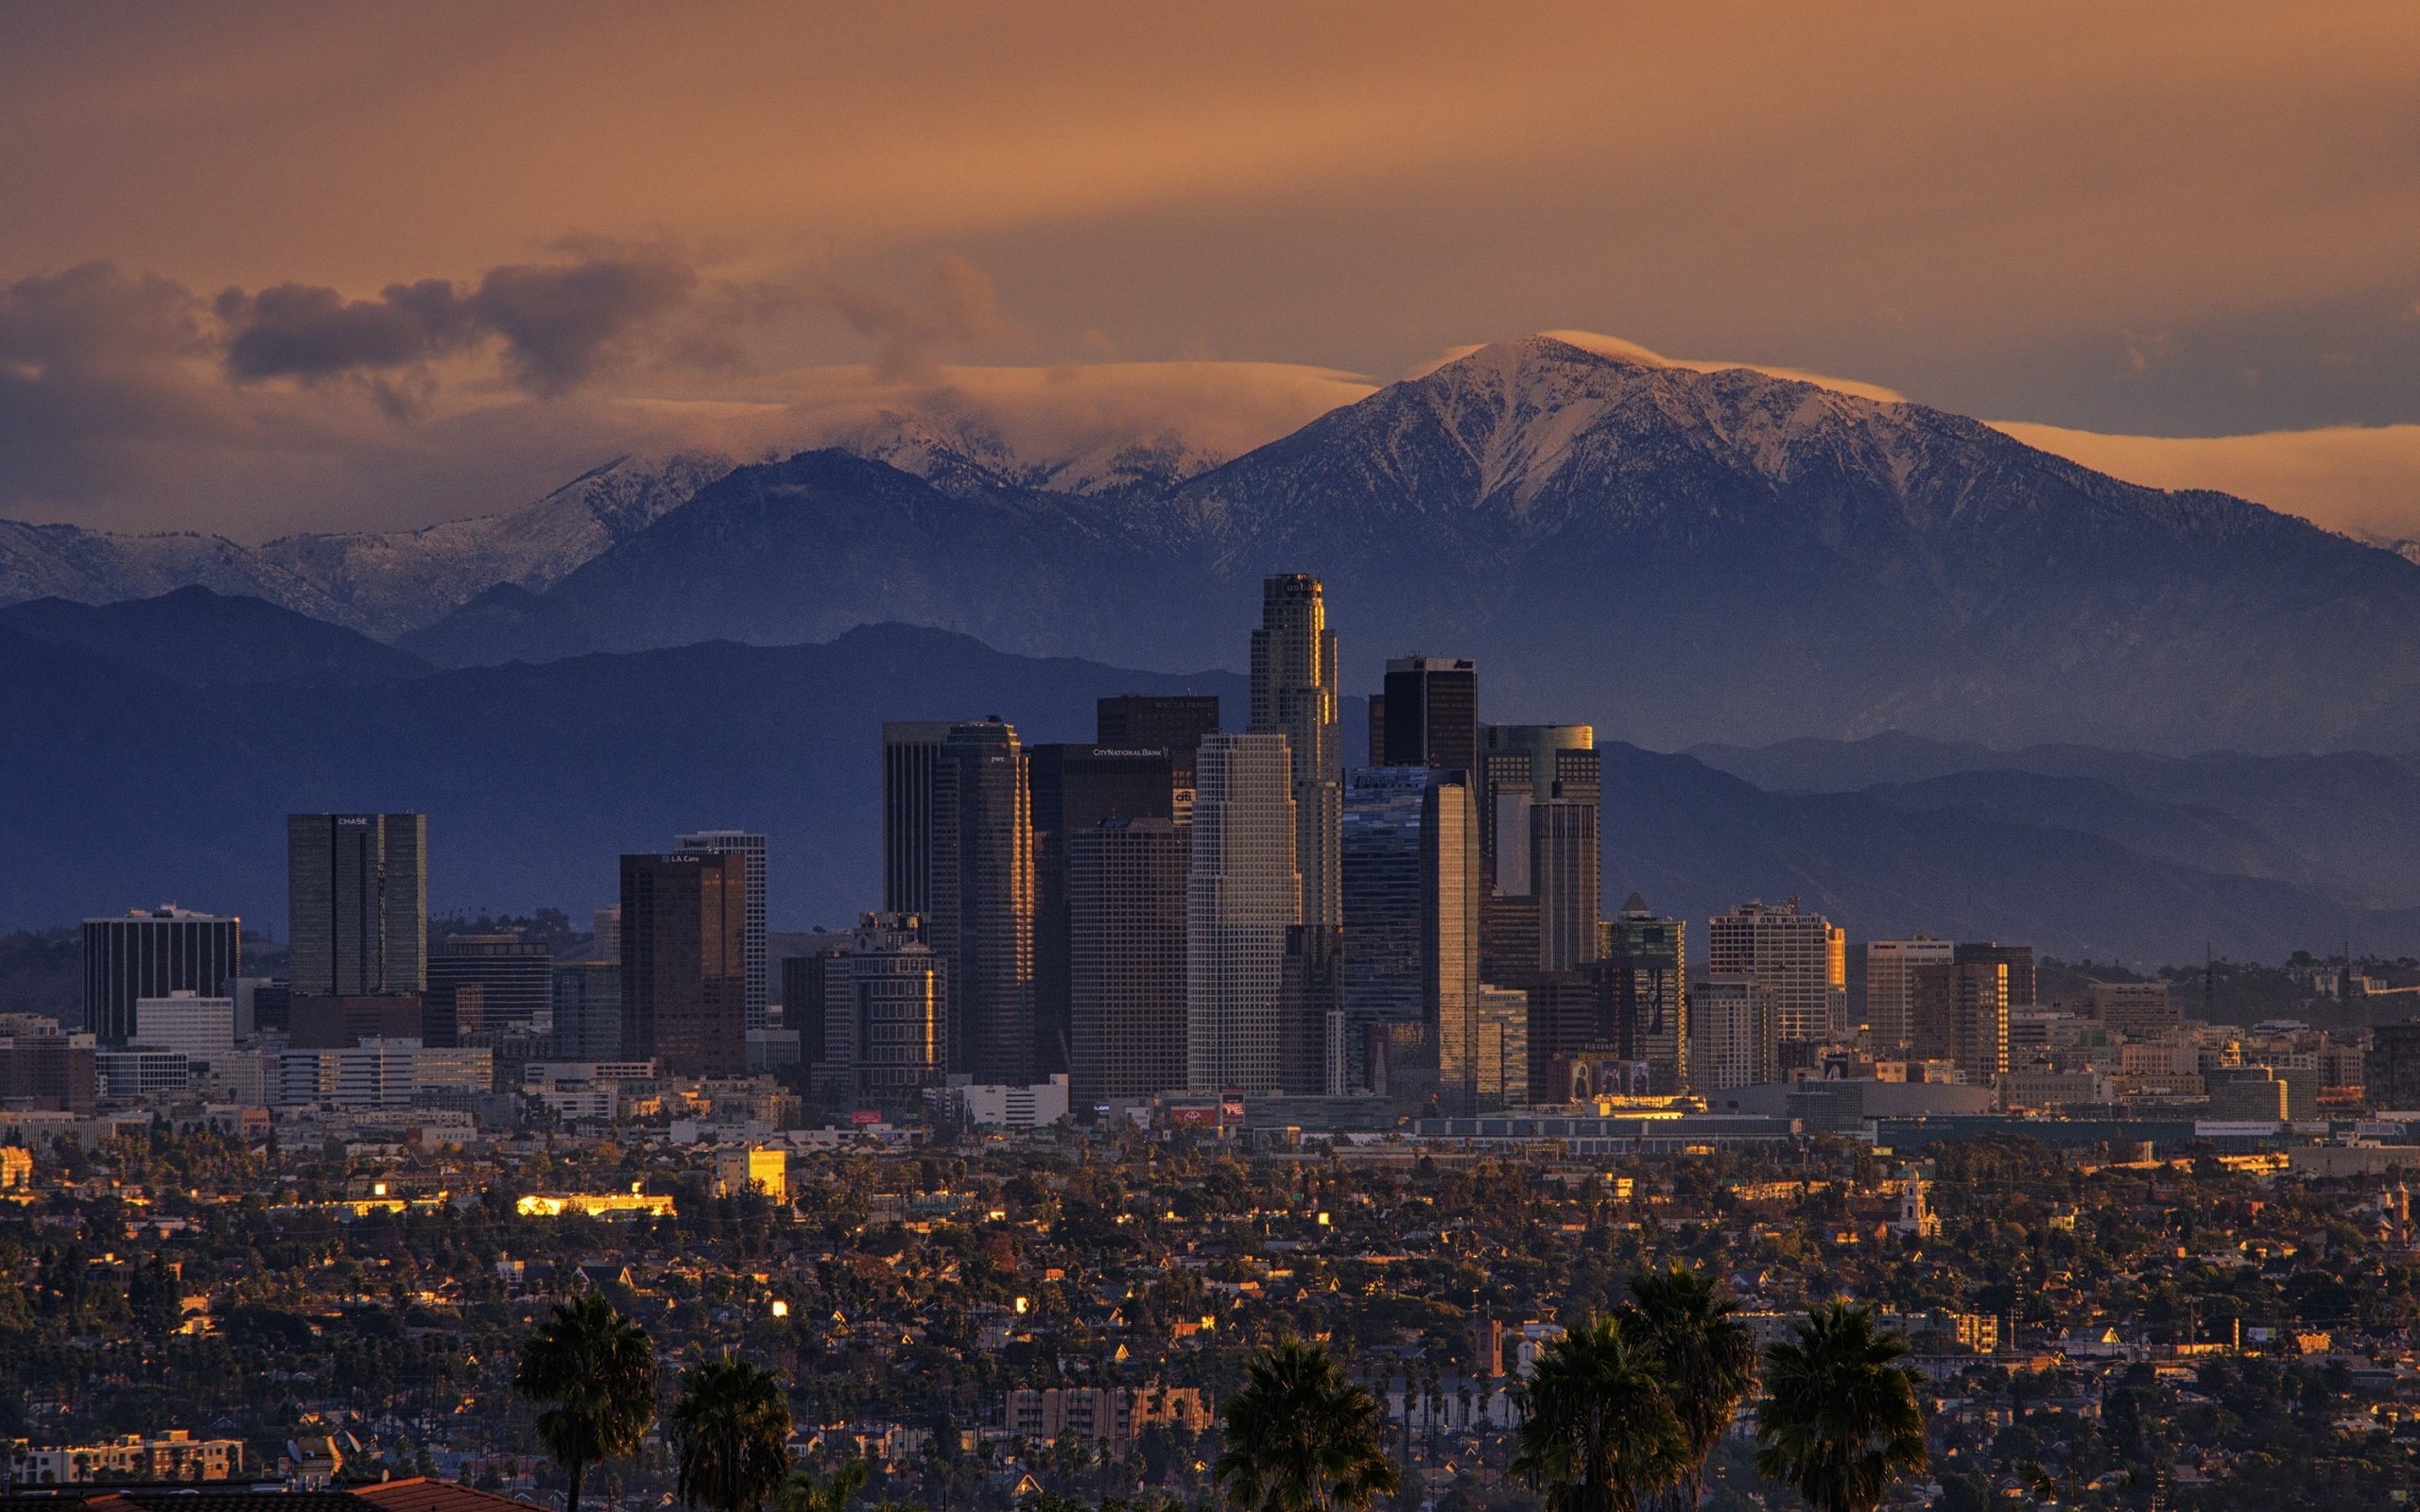 10 Best Los Angeles Hd Wallpapers FULL HD 1920×1080 For PC Background